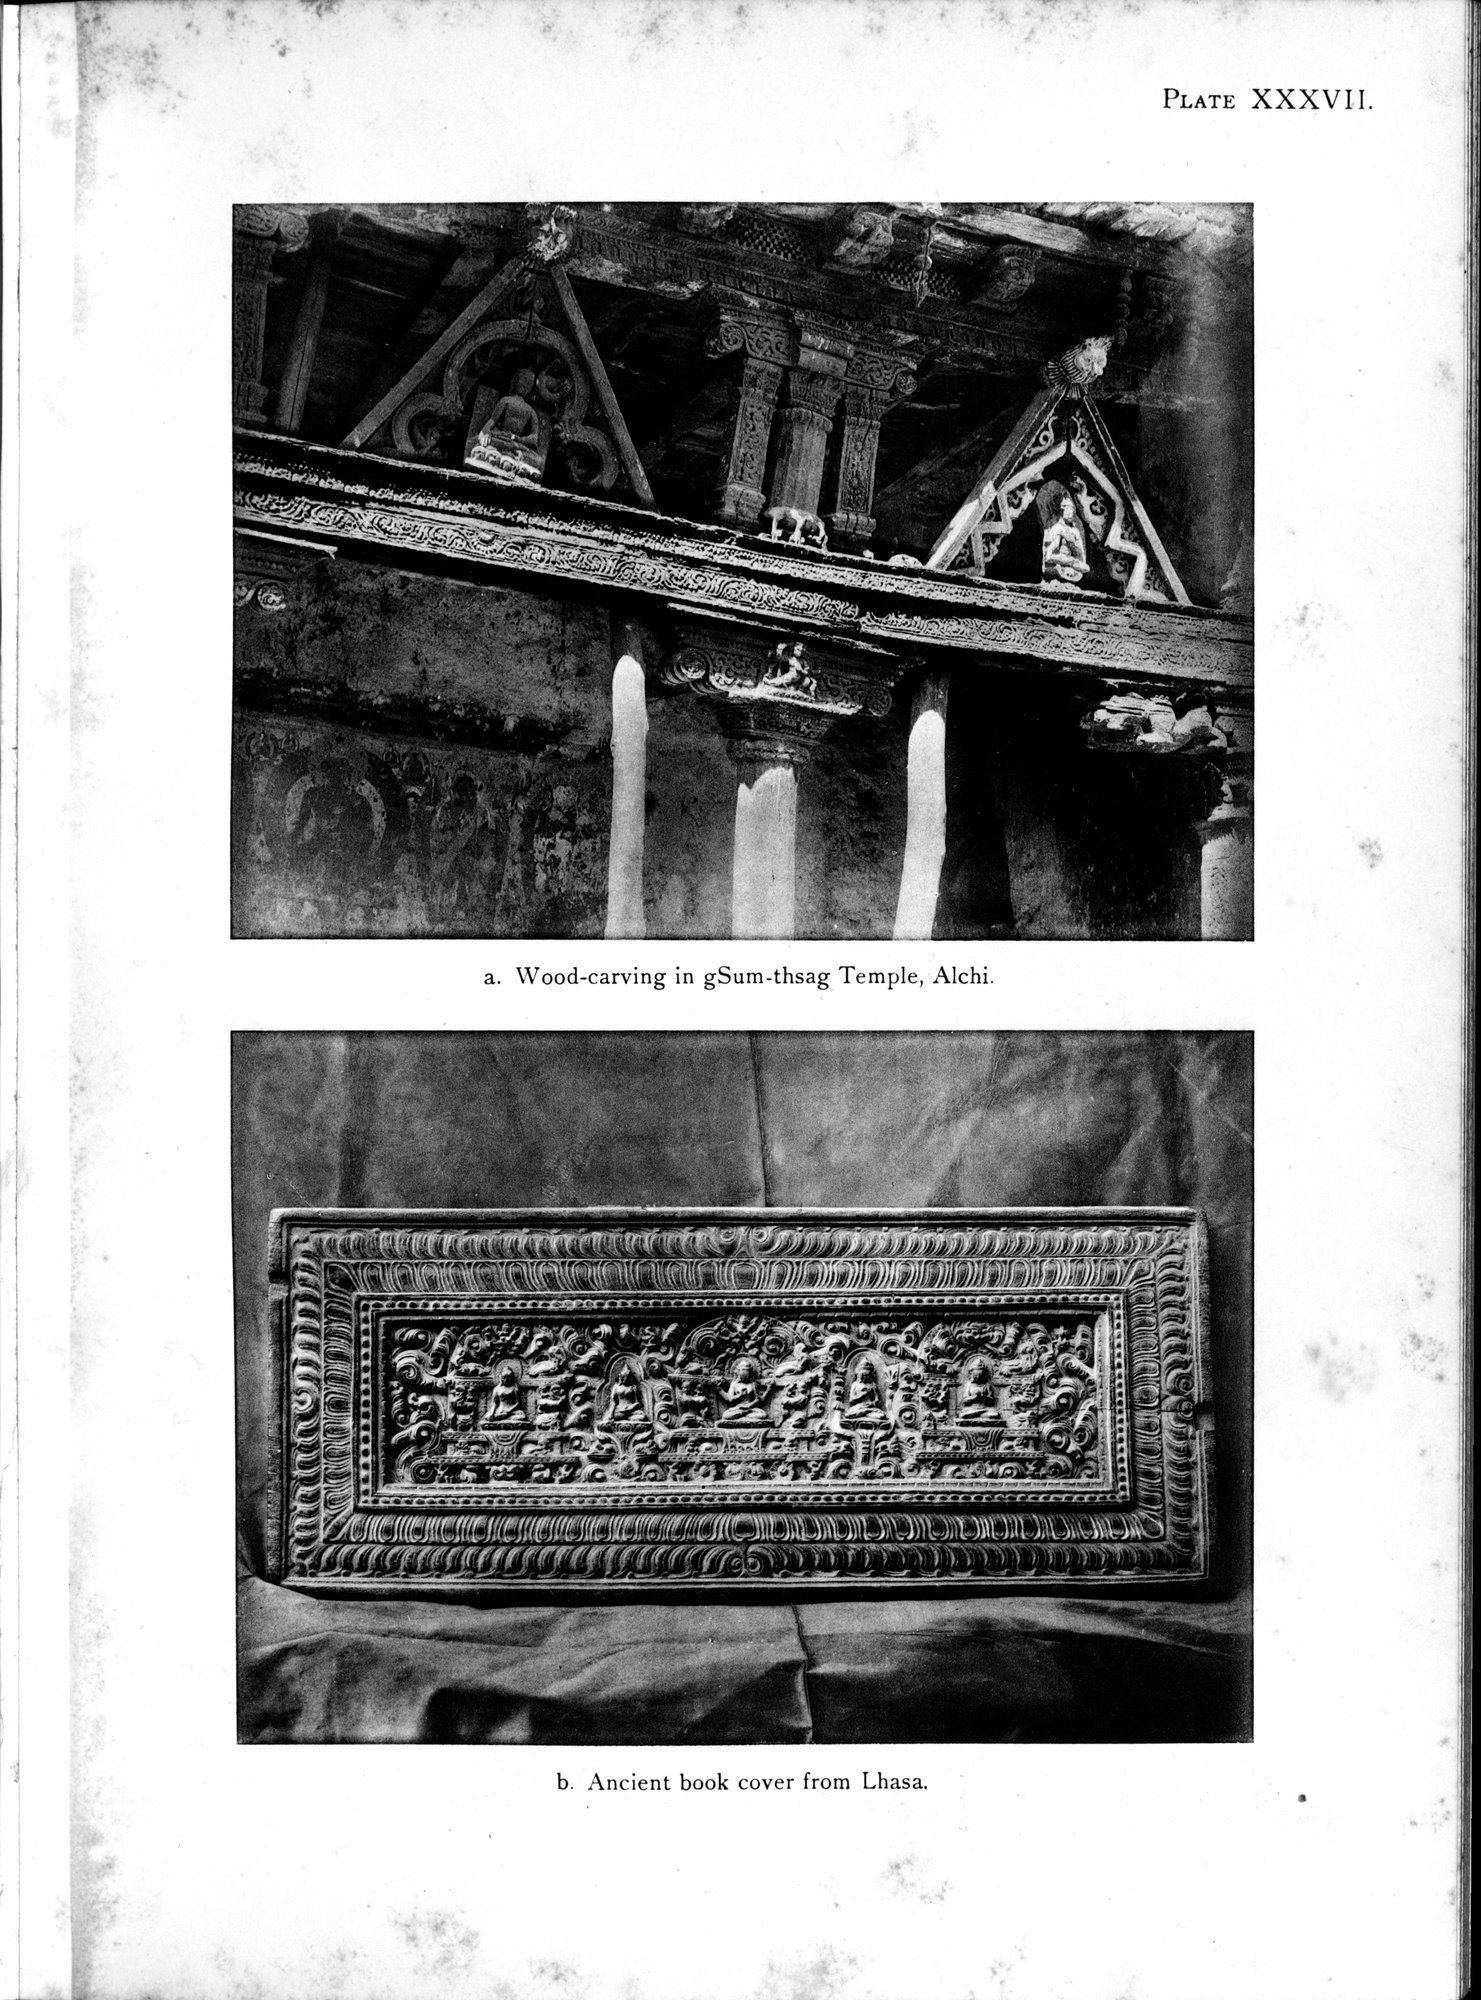 Antiquities of Indian Tibet : vol.1 / Page 183 (Grayscale High Resolution Image)